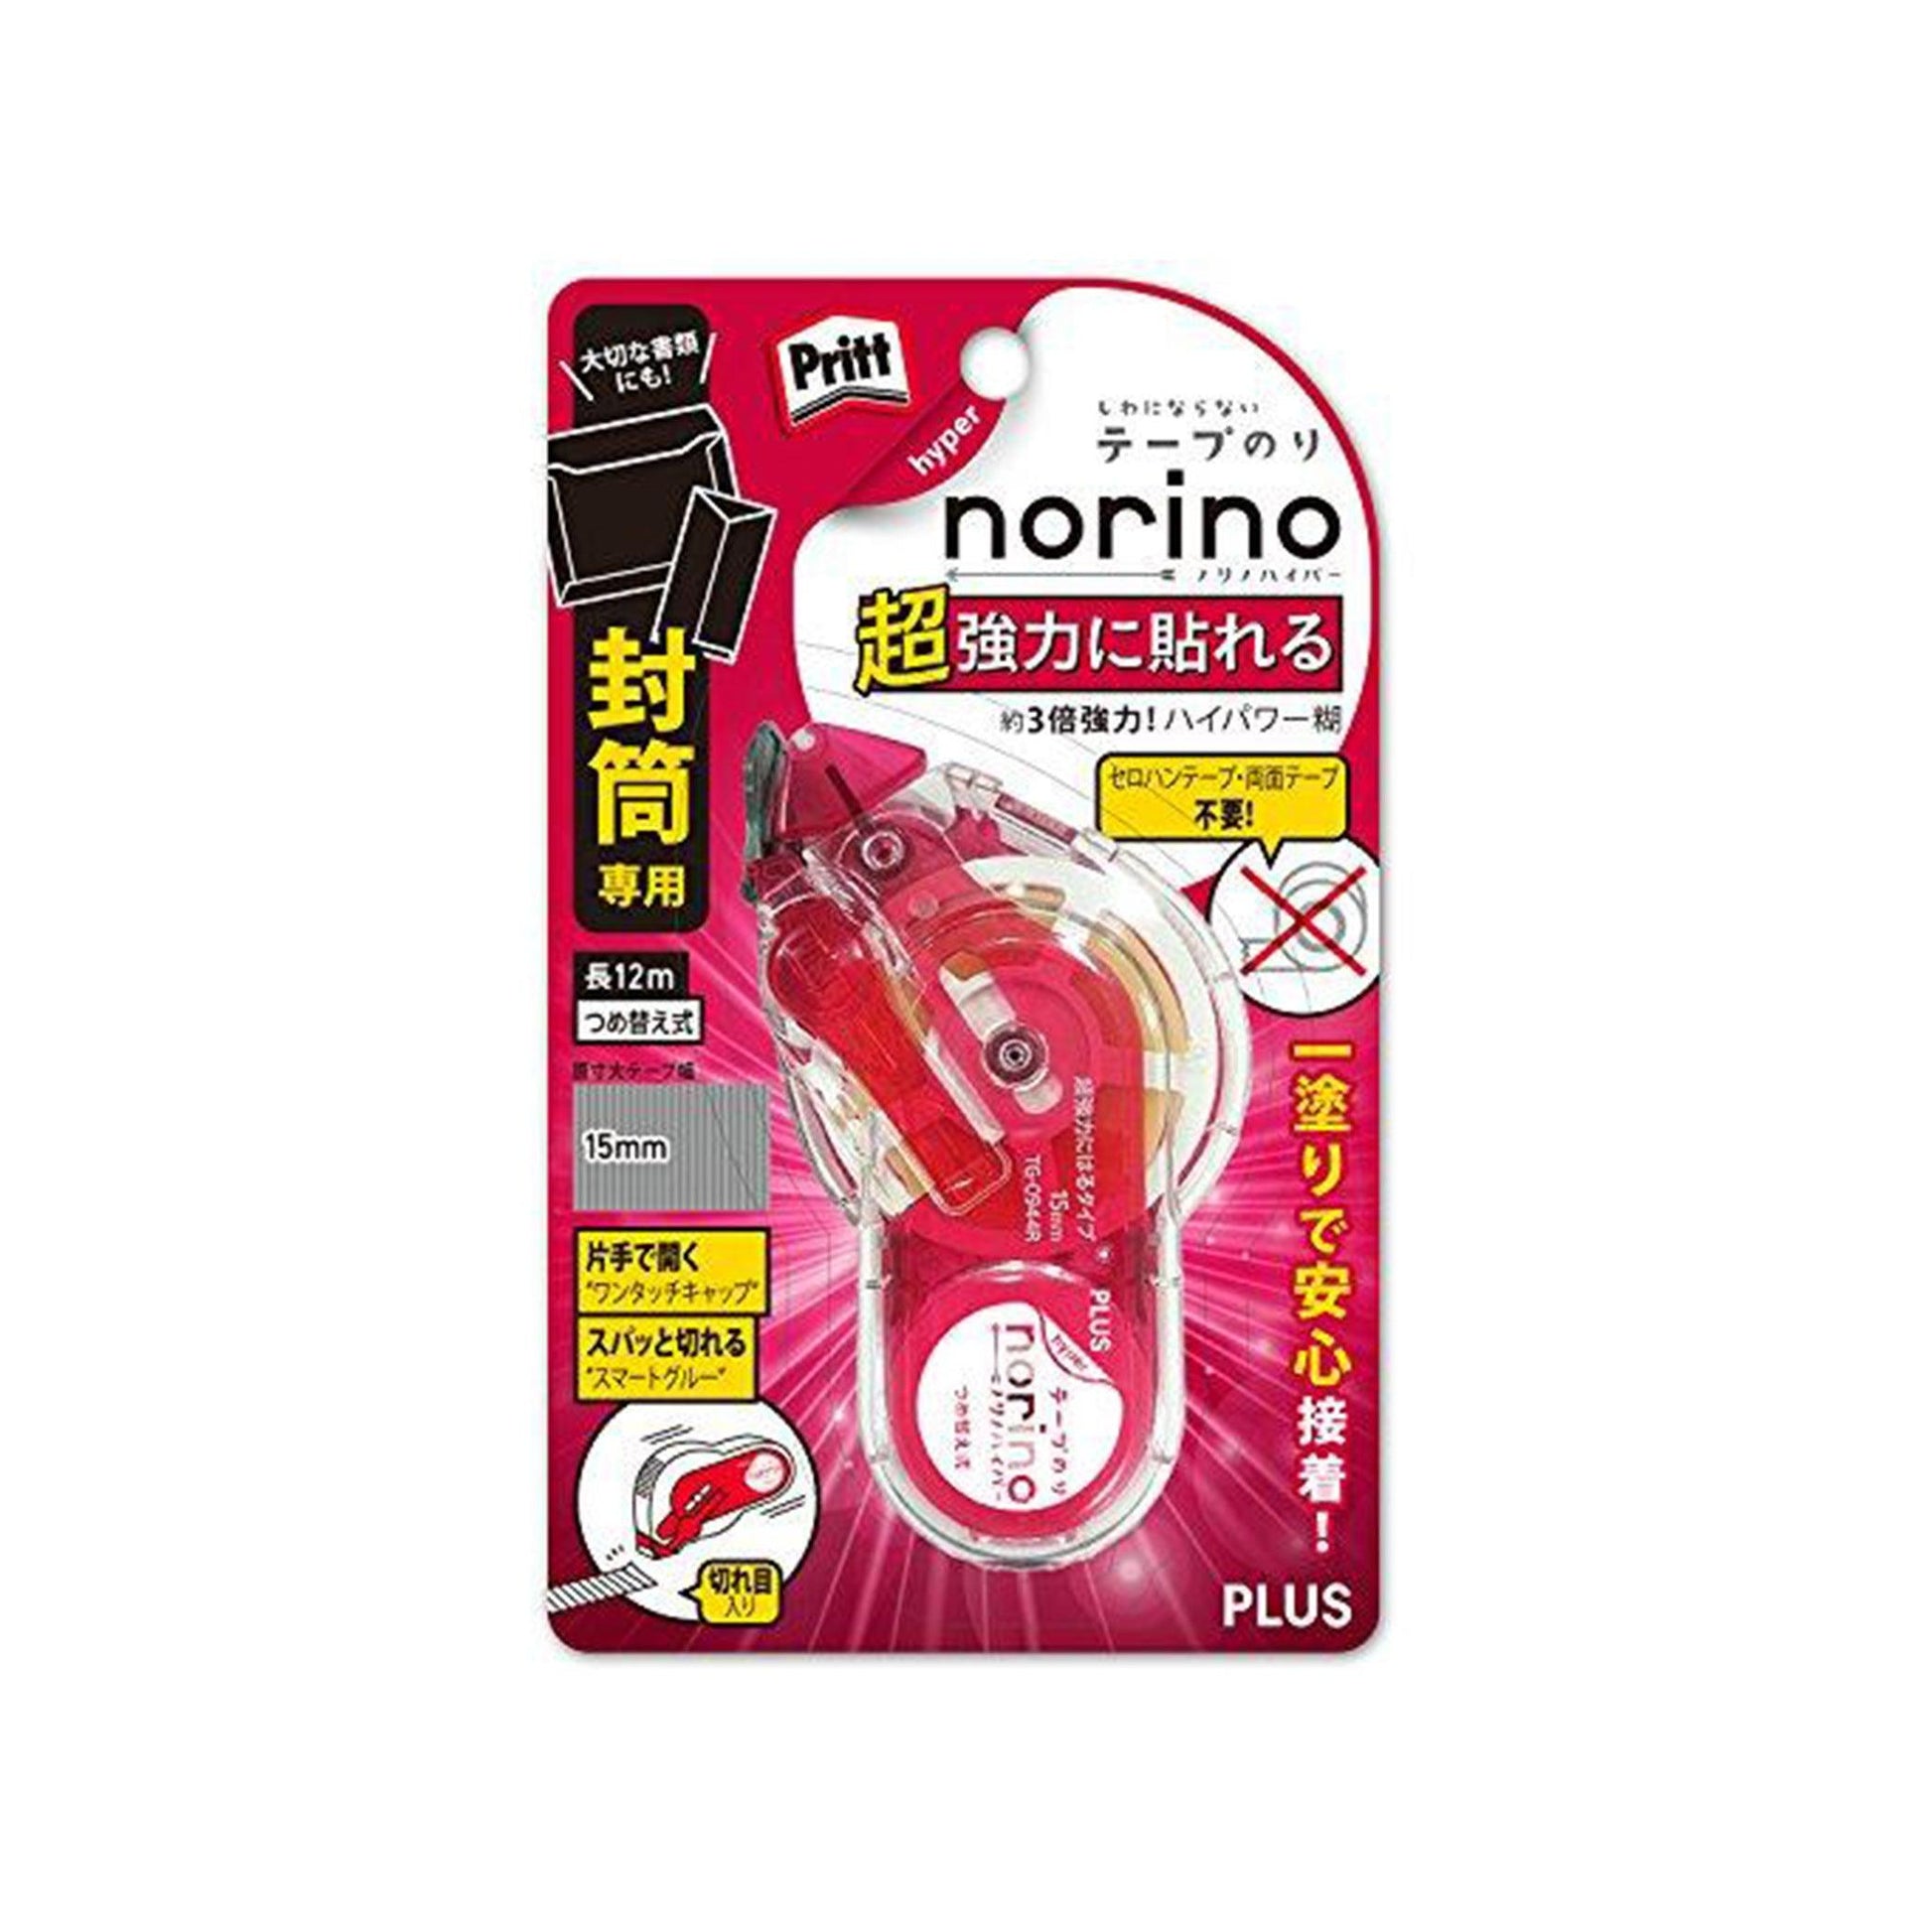 PLUS TG-0945 Norino Super Strong Bean Color Paste Double-sided Tape Easy-Tear Double-sided Tape - CHL-STORE 